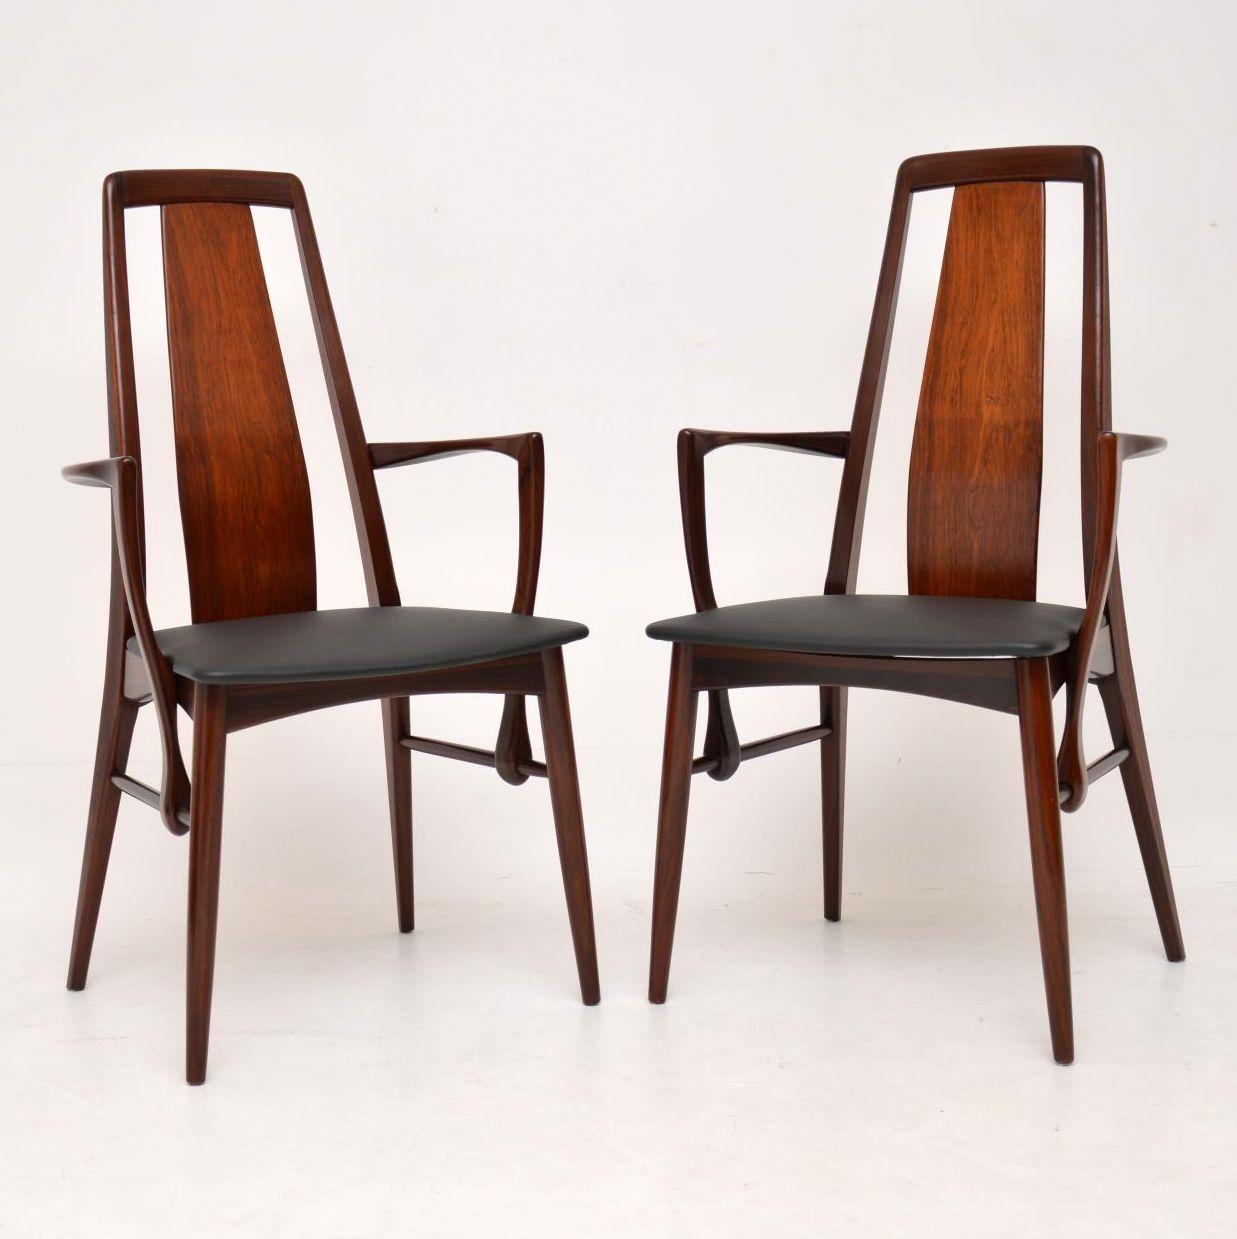 A beautifully designed set of six Danish dining chairs, these were designed by Niels Koefoed and they date from the 1960s. The quality is outstanding, they have gorgeous grain patterns, they look amazing from all angles, especially the carvers. We